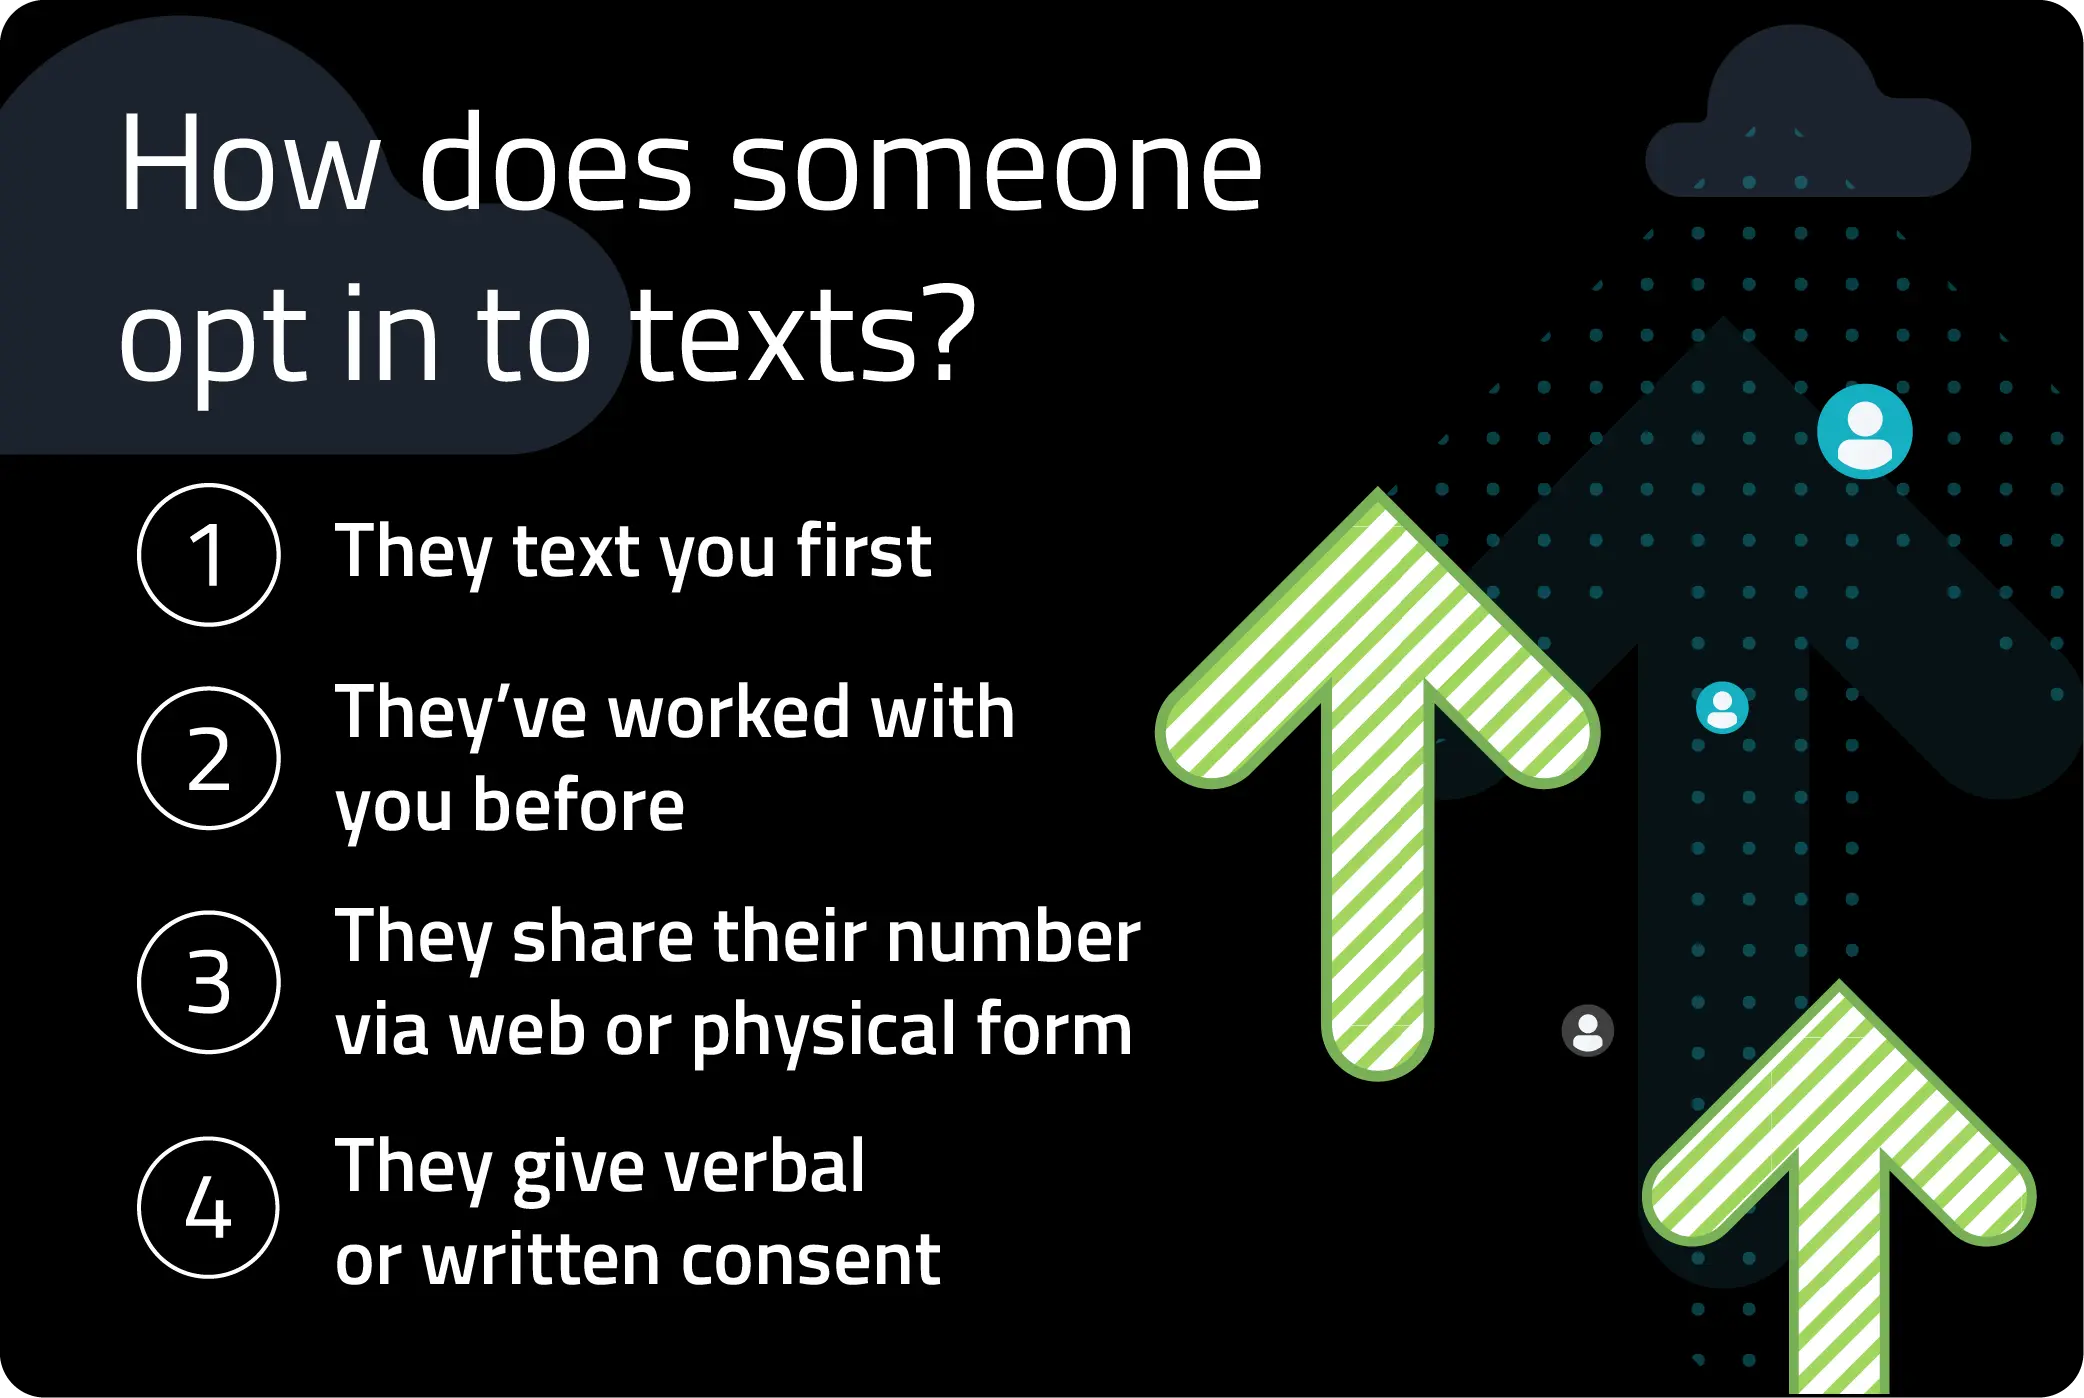 5. Text messaging is a popular means of